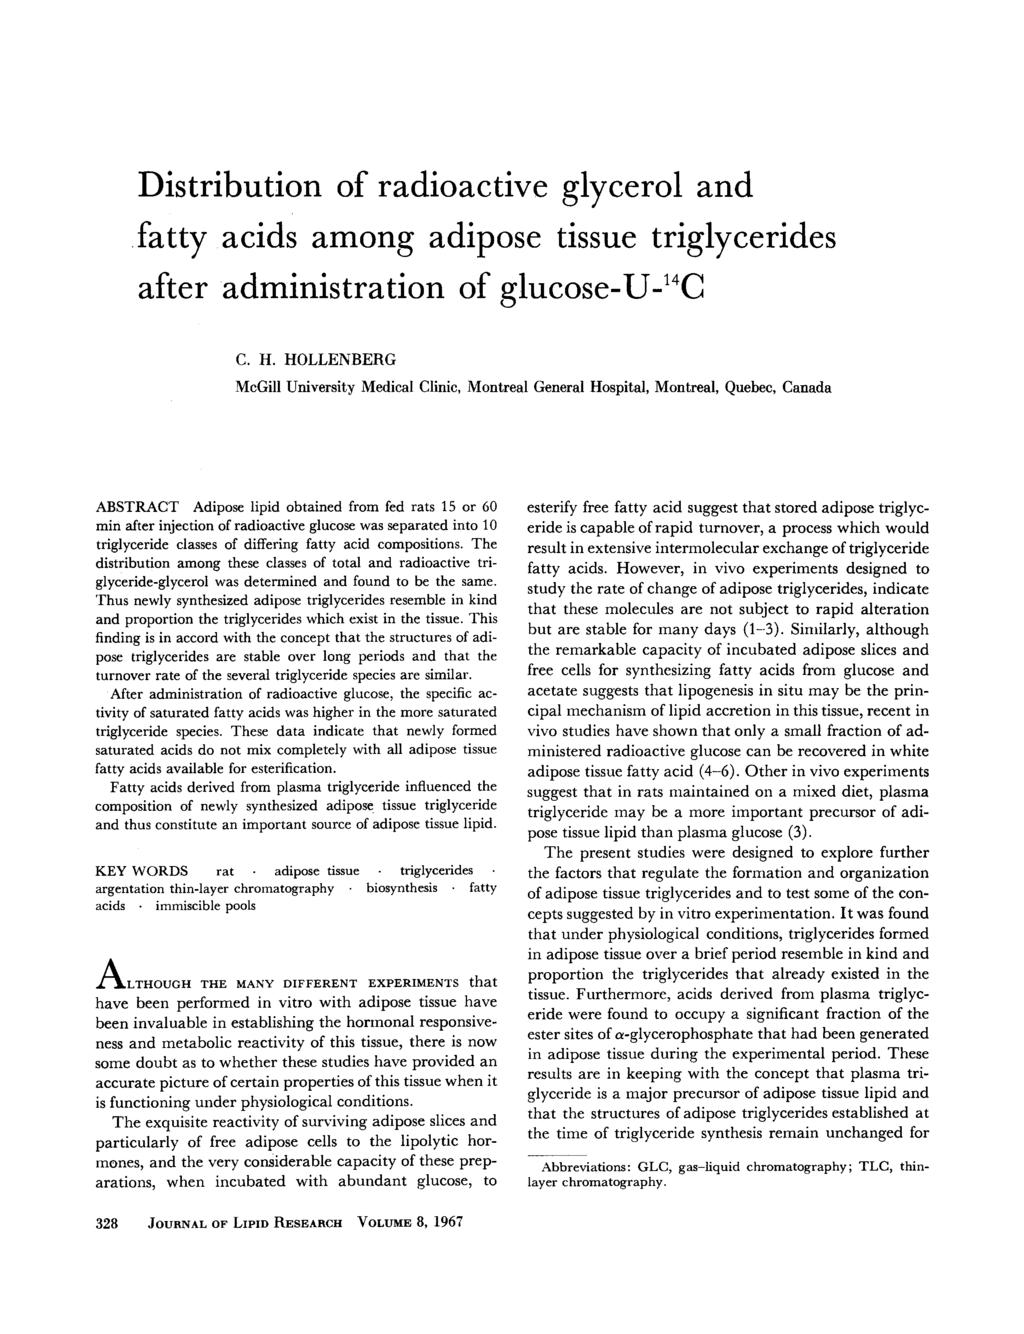 Distribution of radioactive glycerol and fatty acids among adipose tissue triglycerides after administration of glucose-u-'"c C. H.